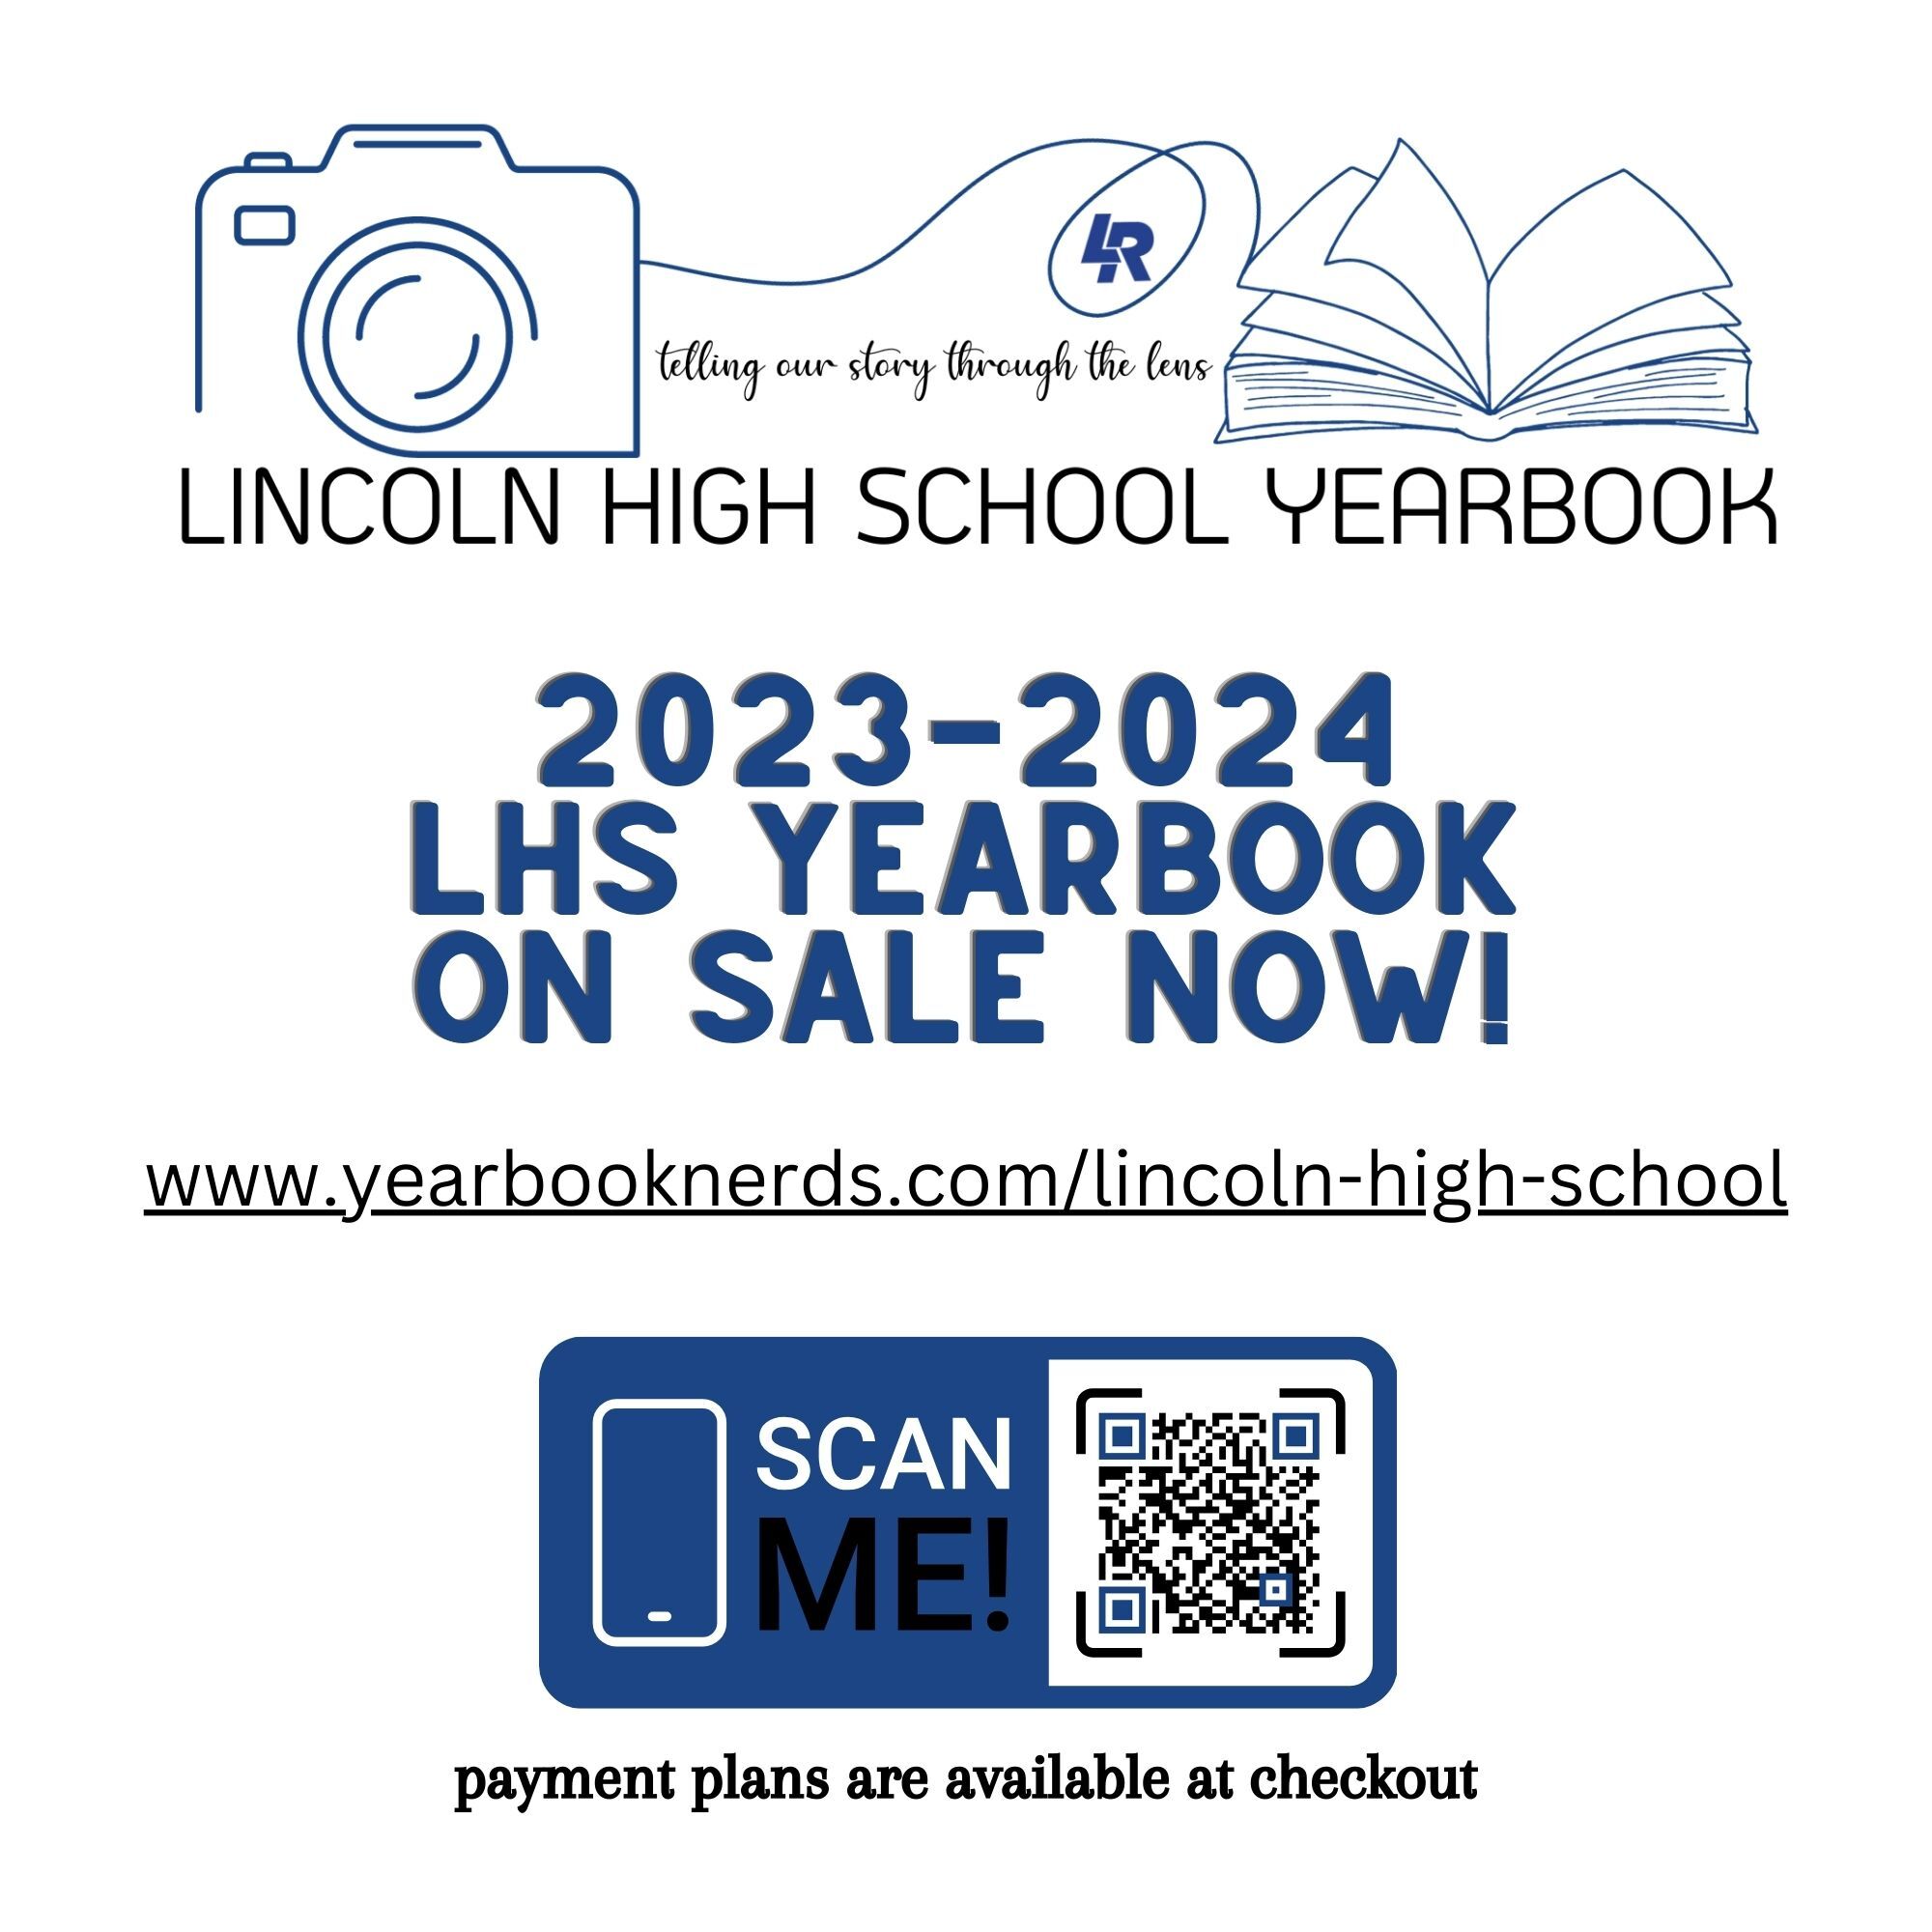 2023-2024 Yearbooks on sale now!